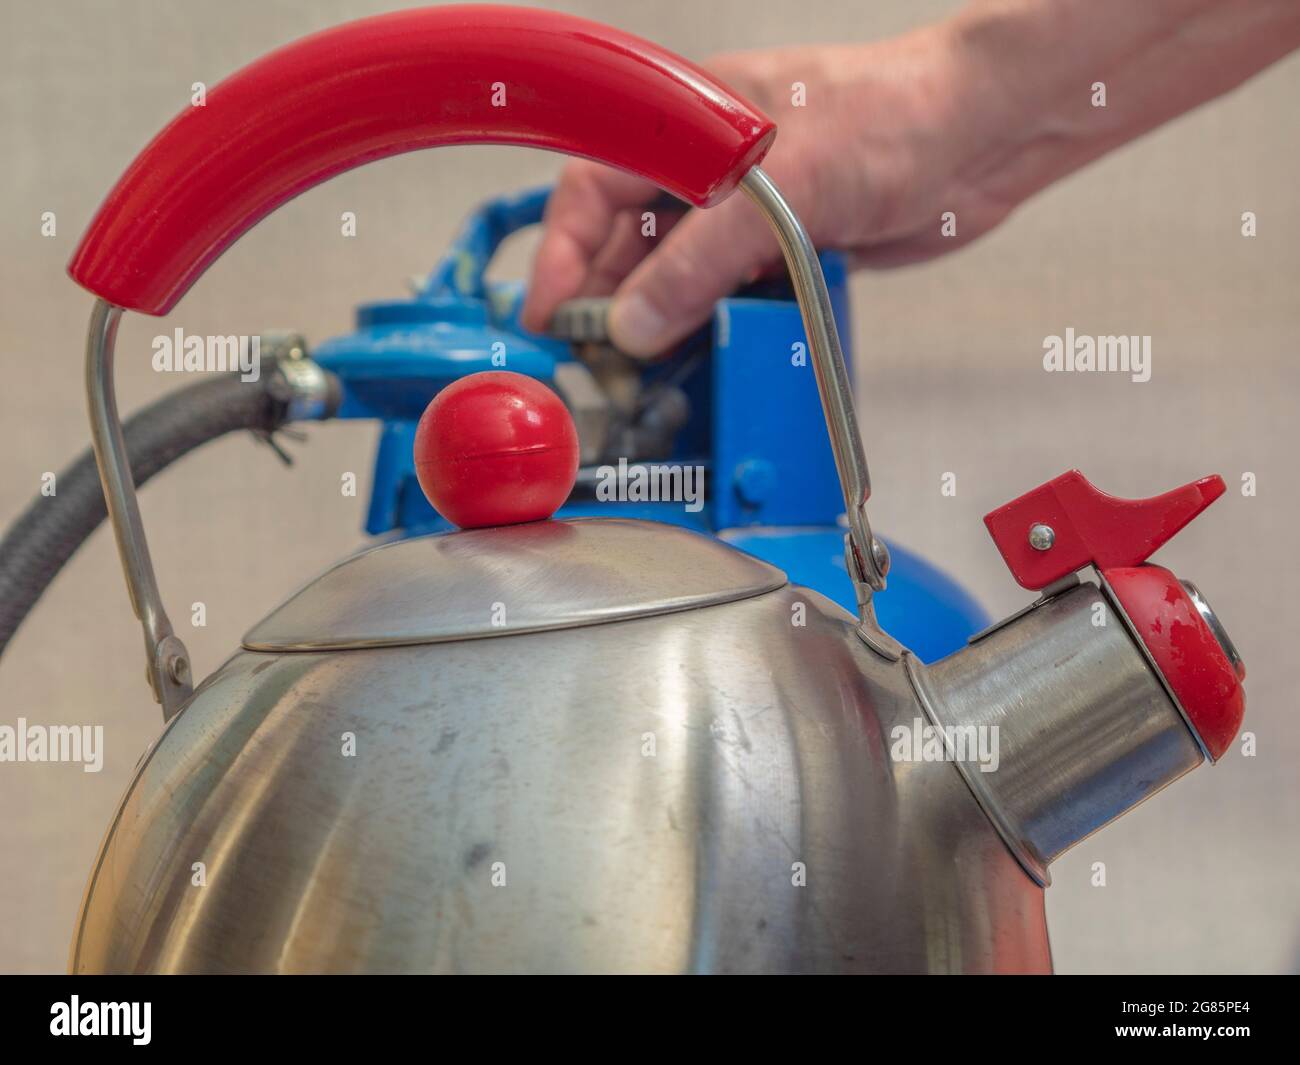 A steel rounded kettle in sharp focus in the foreground, then behind, a man’s fingers loosening the tap on an old blue painted, portable gas bottle. Stock Photo